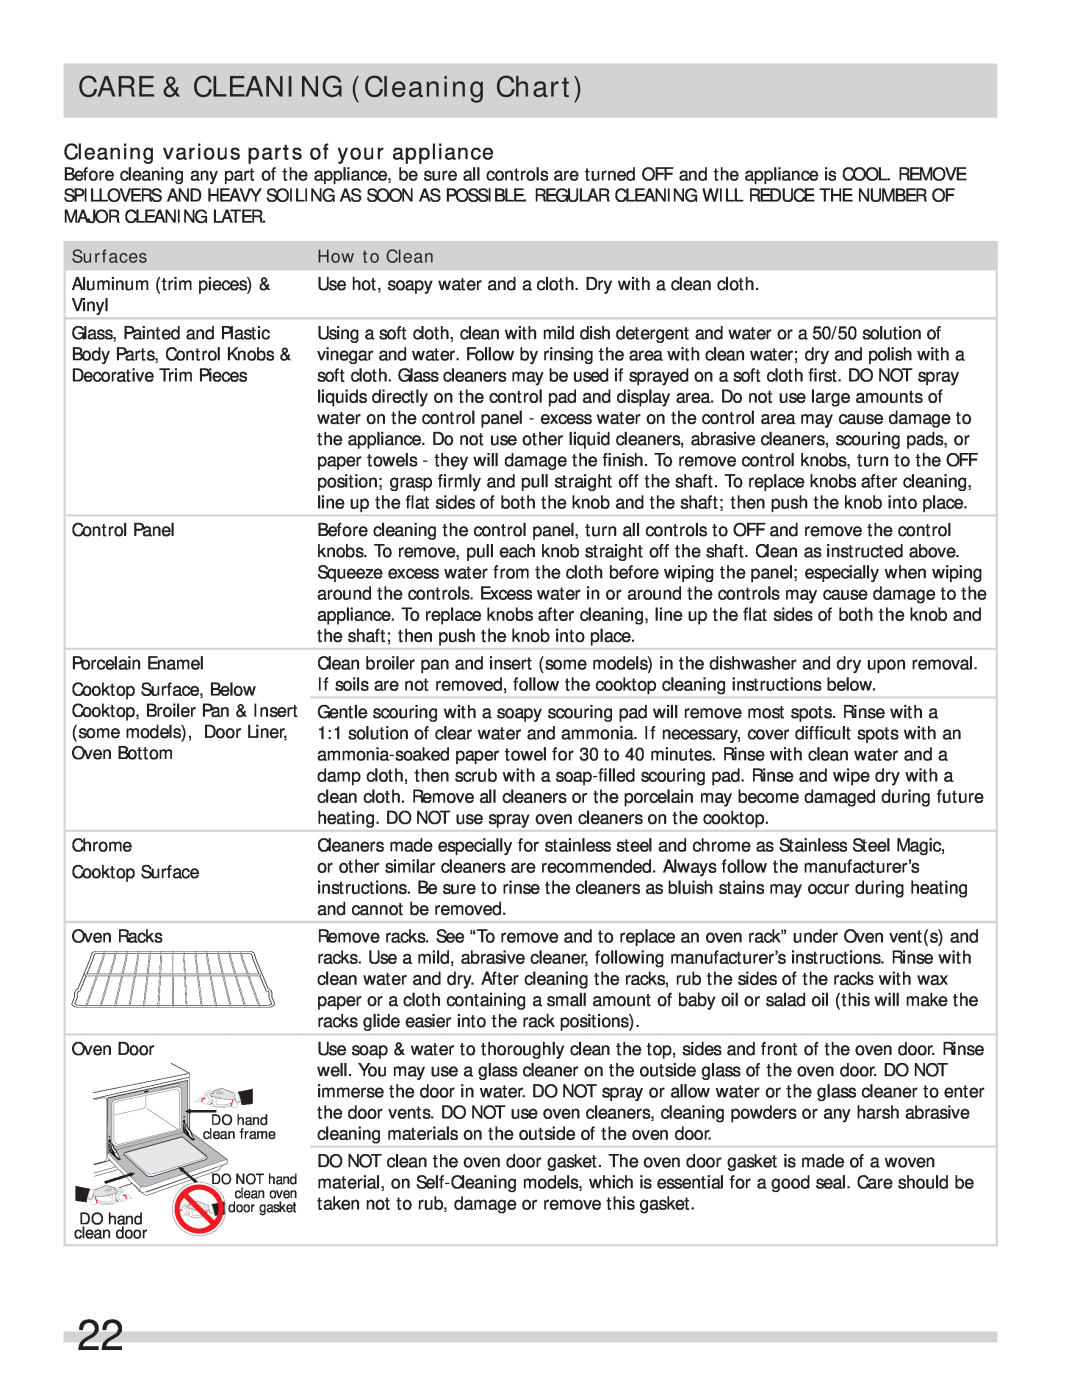 Frigidaire FFEF4005LW, FFEF4017LB, FFEF3000MW CARE & CLEANING Cleaning Chart, Cleaning various parts of your appliance 